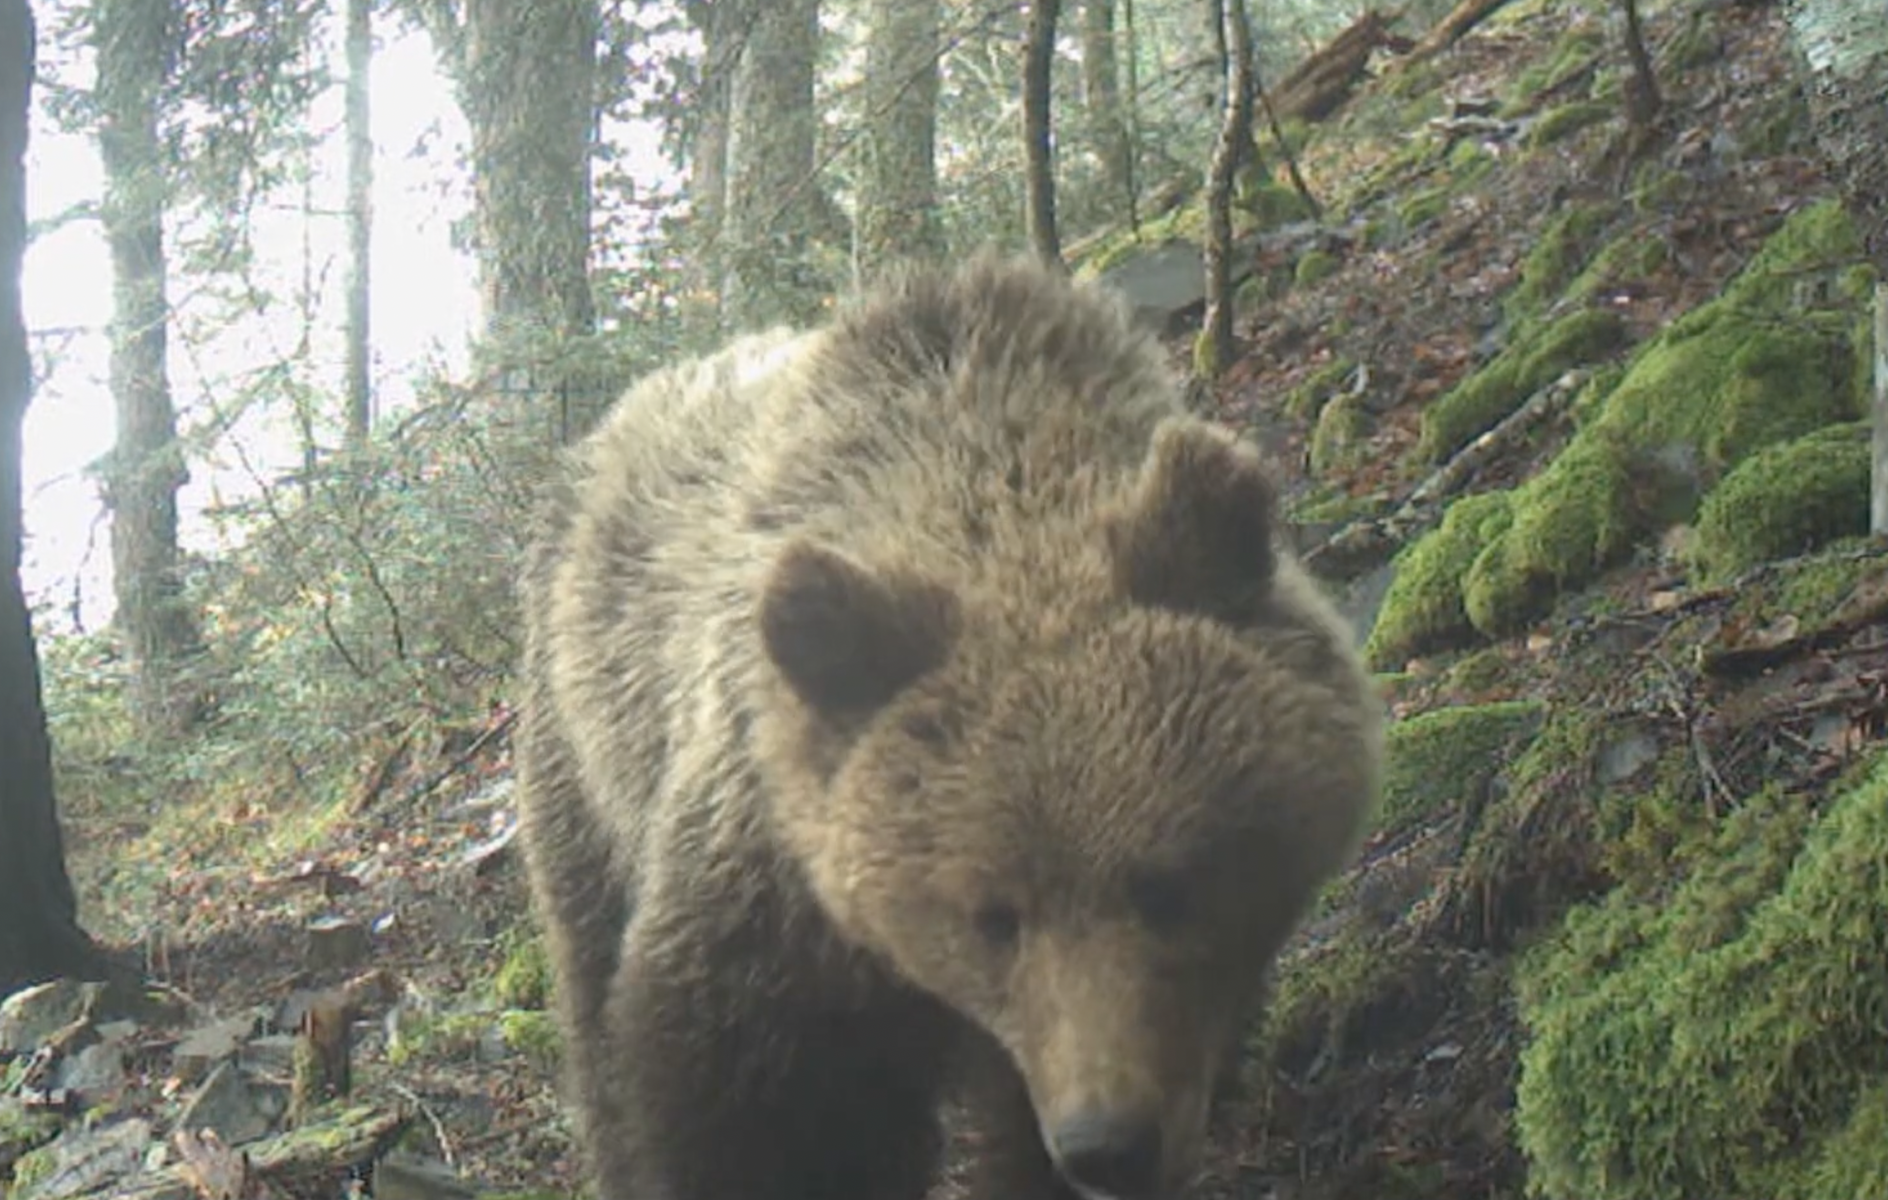 A brown bear in the woods.